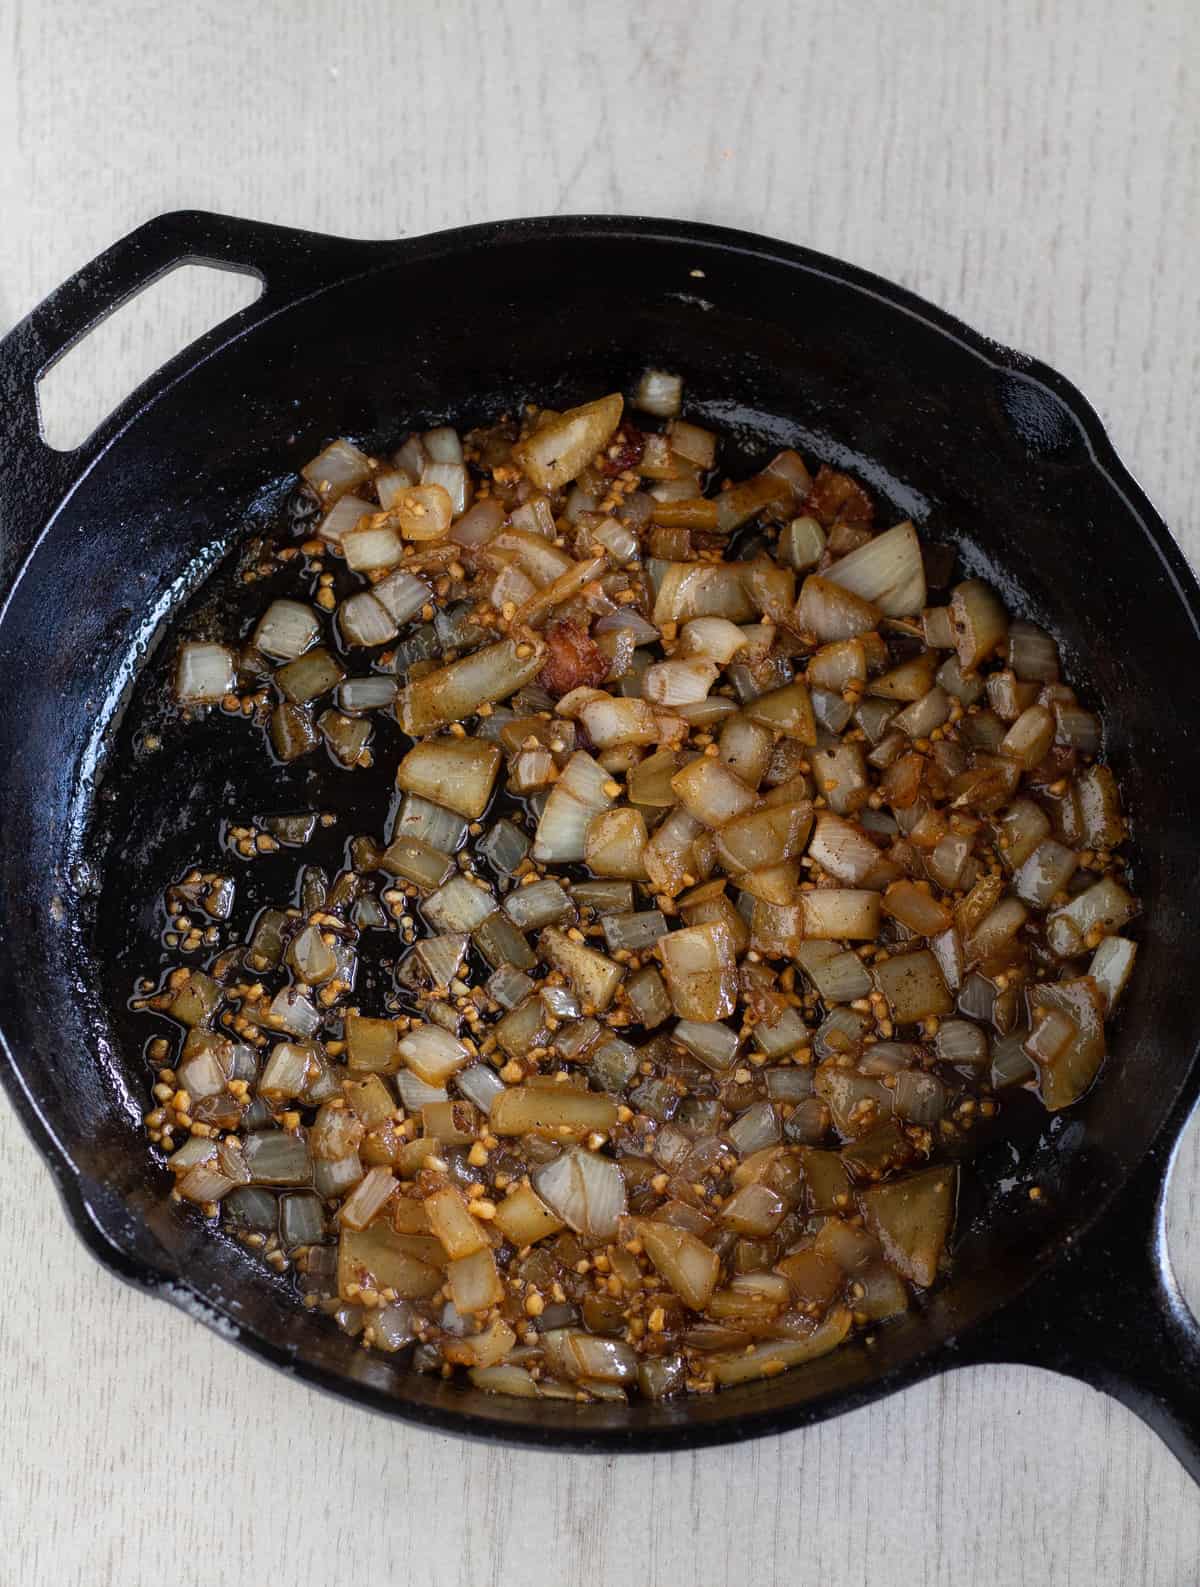 Cooked onion and garlic in a cast-iron skillet.